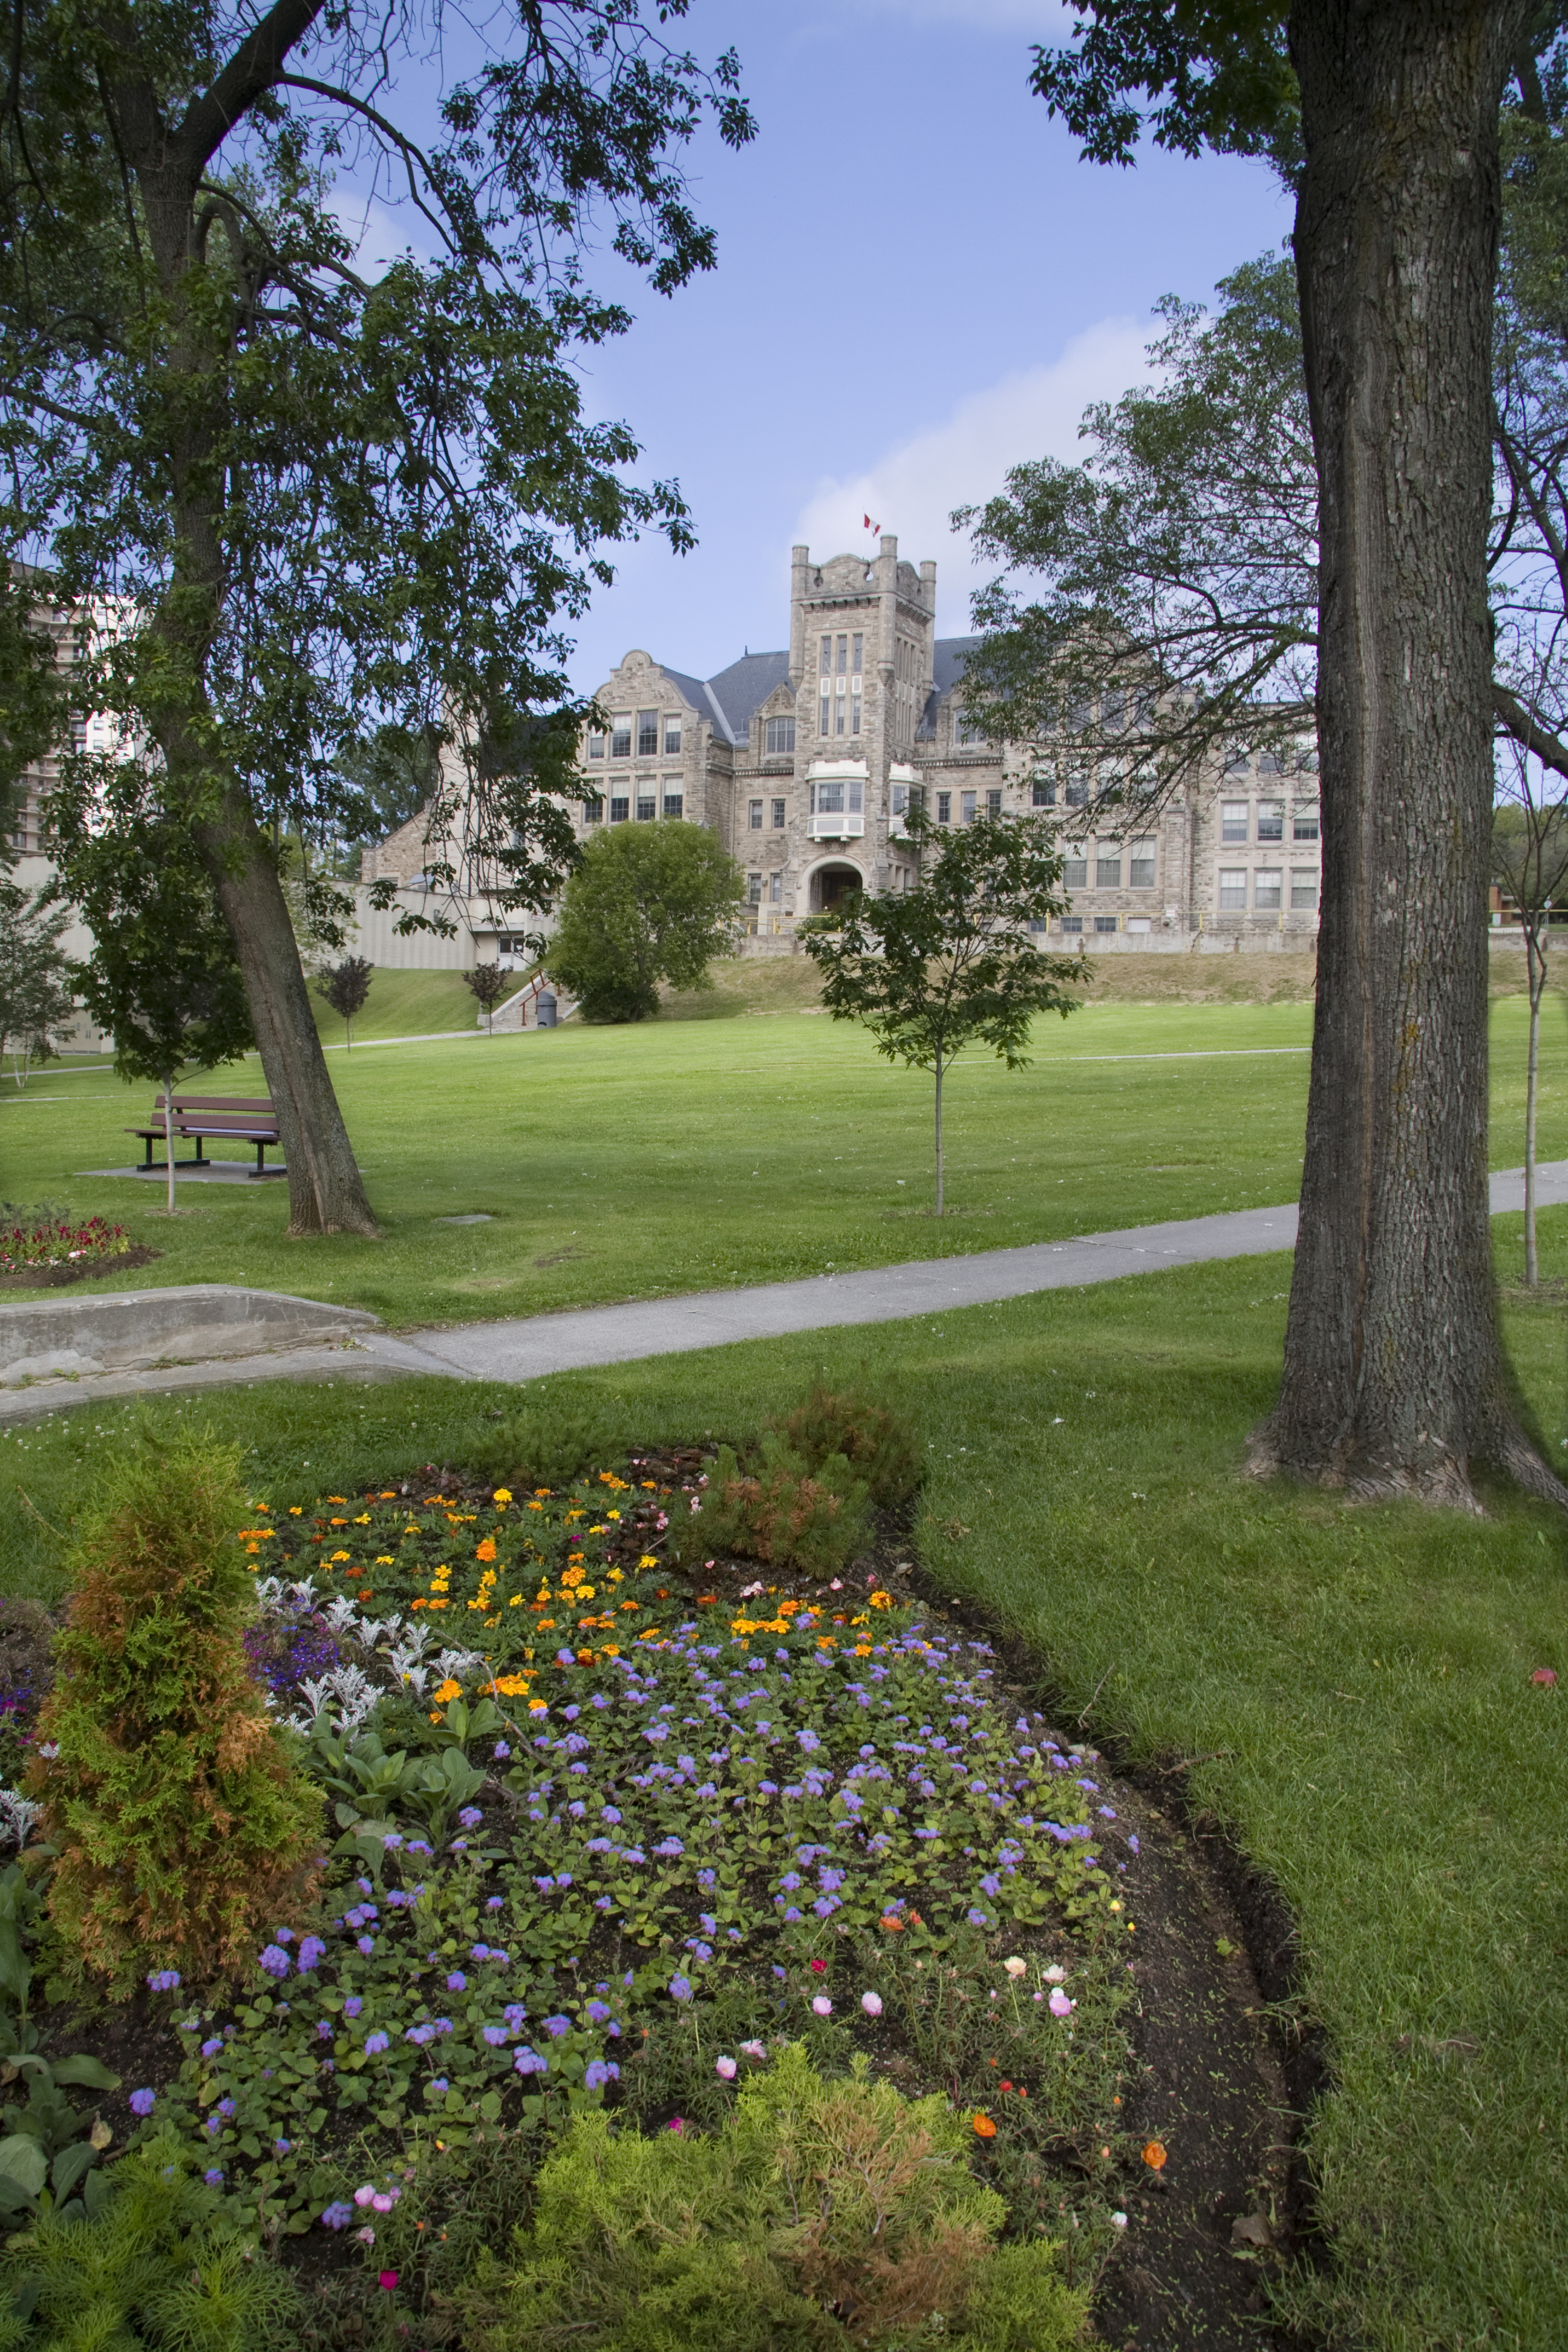 View of Law School with flowers in foreground